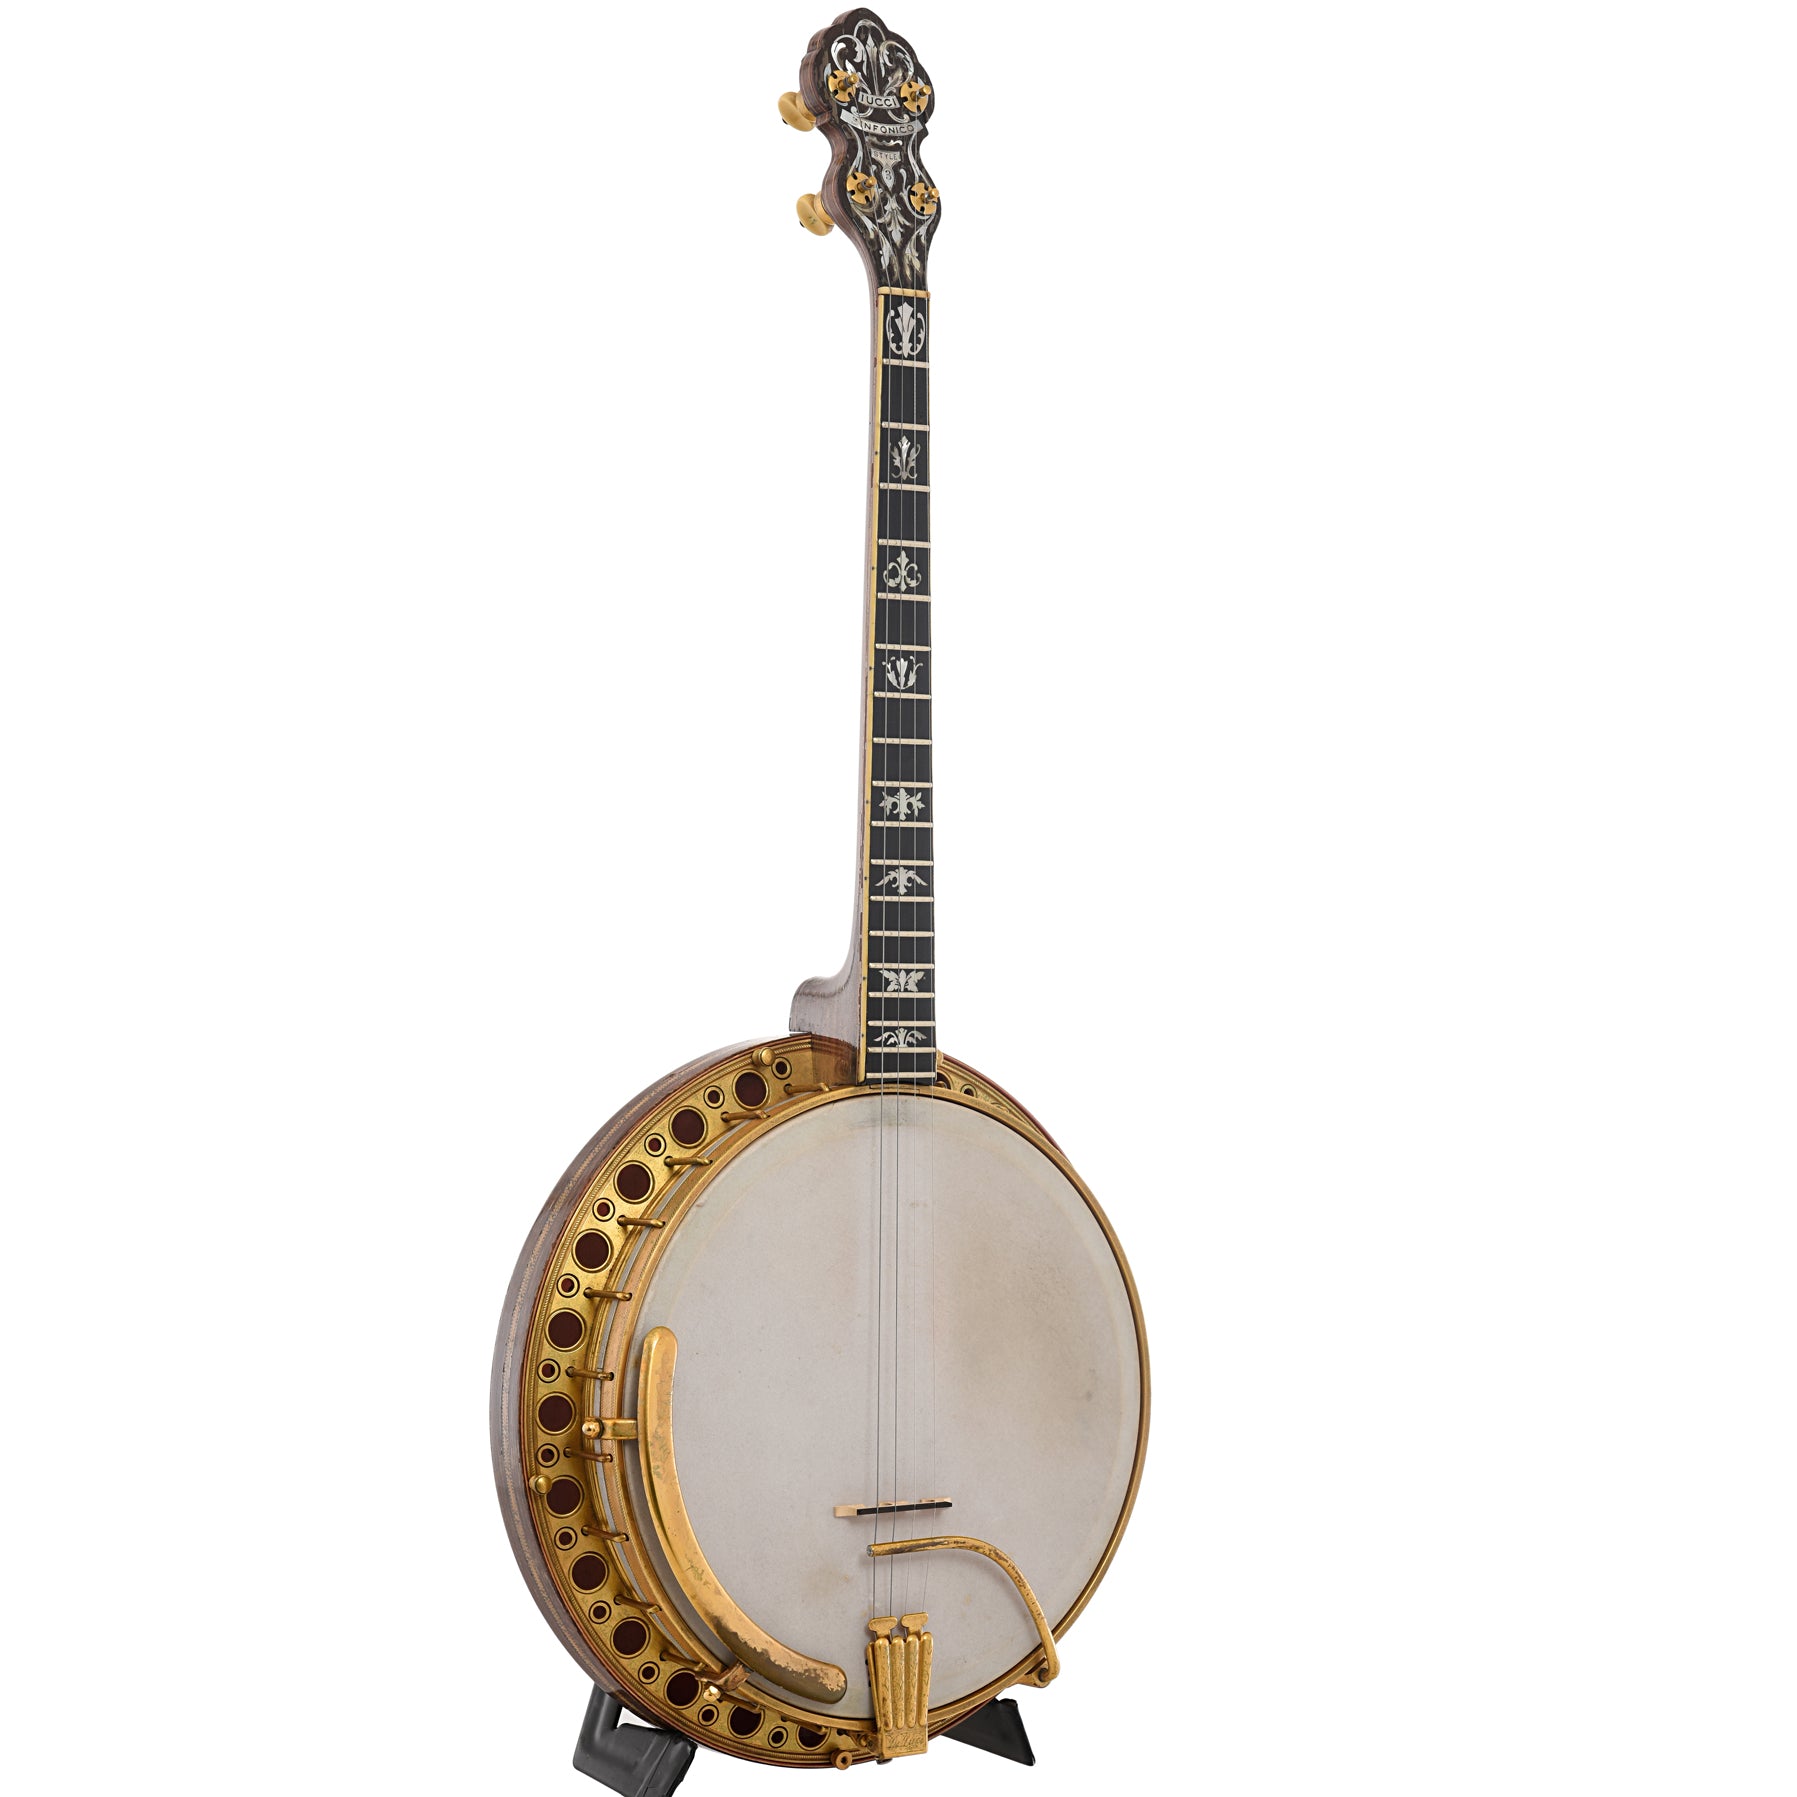 Full front and side of Iucci Sinfonico Style 3 Tenor Banjo